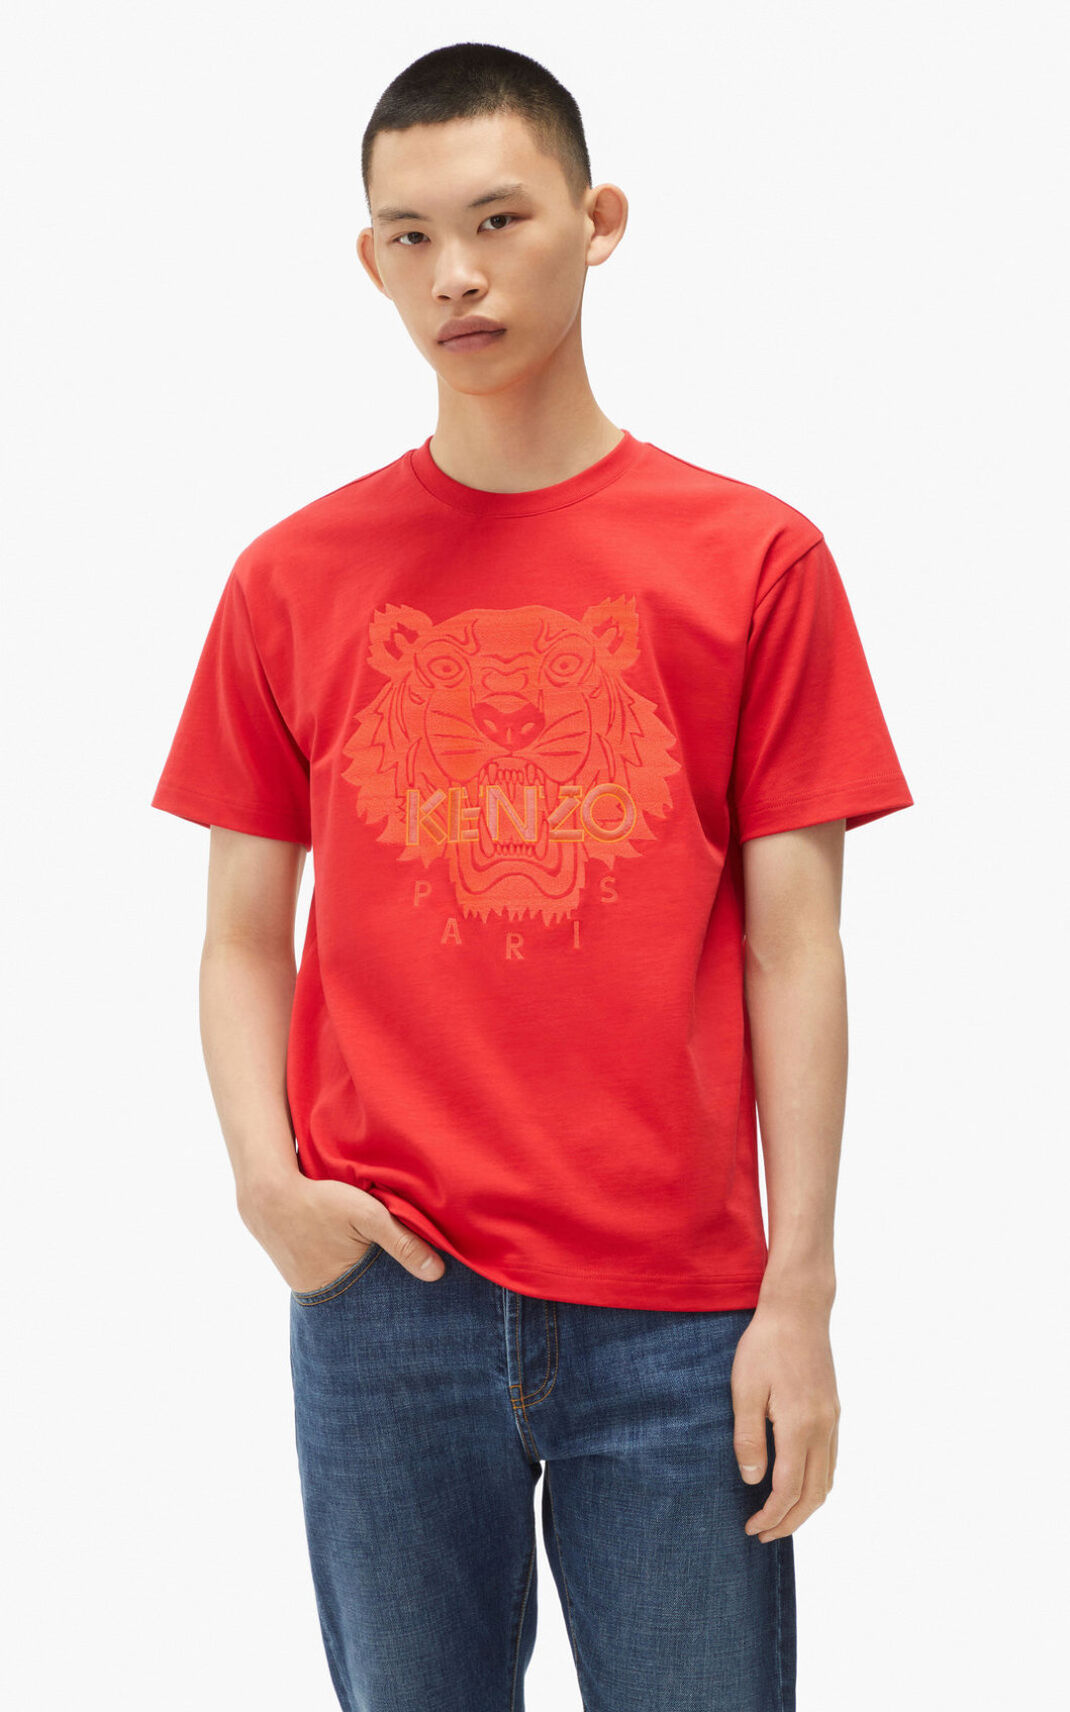 Kenzo Tiger loose fitting T Shirt Red For Mens 4123SRDNG